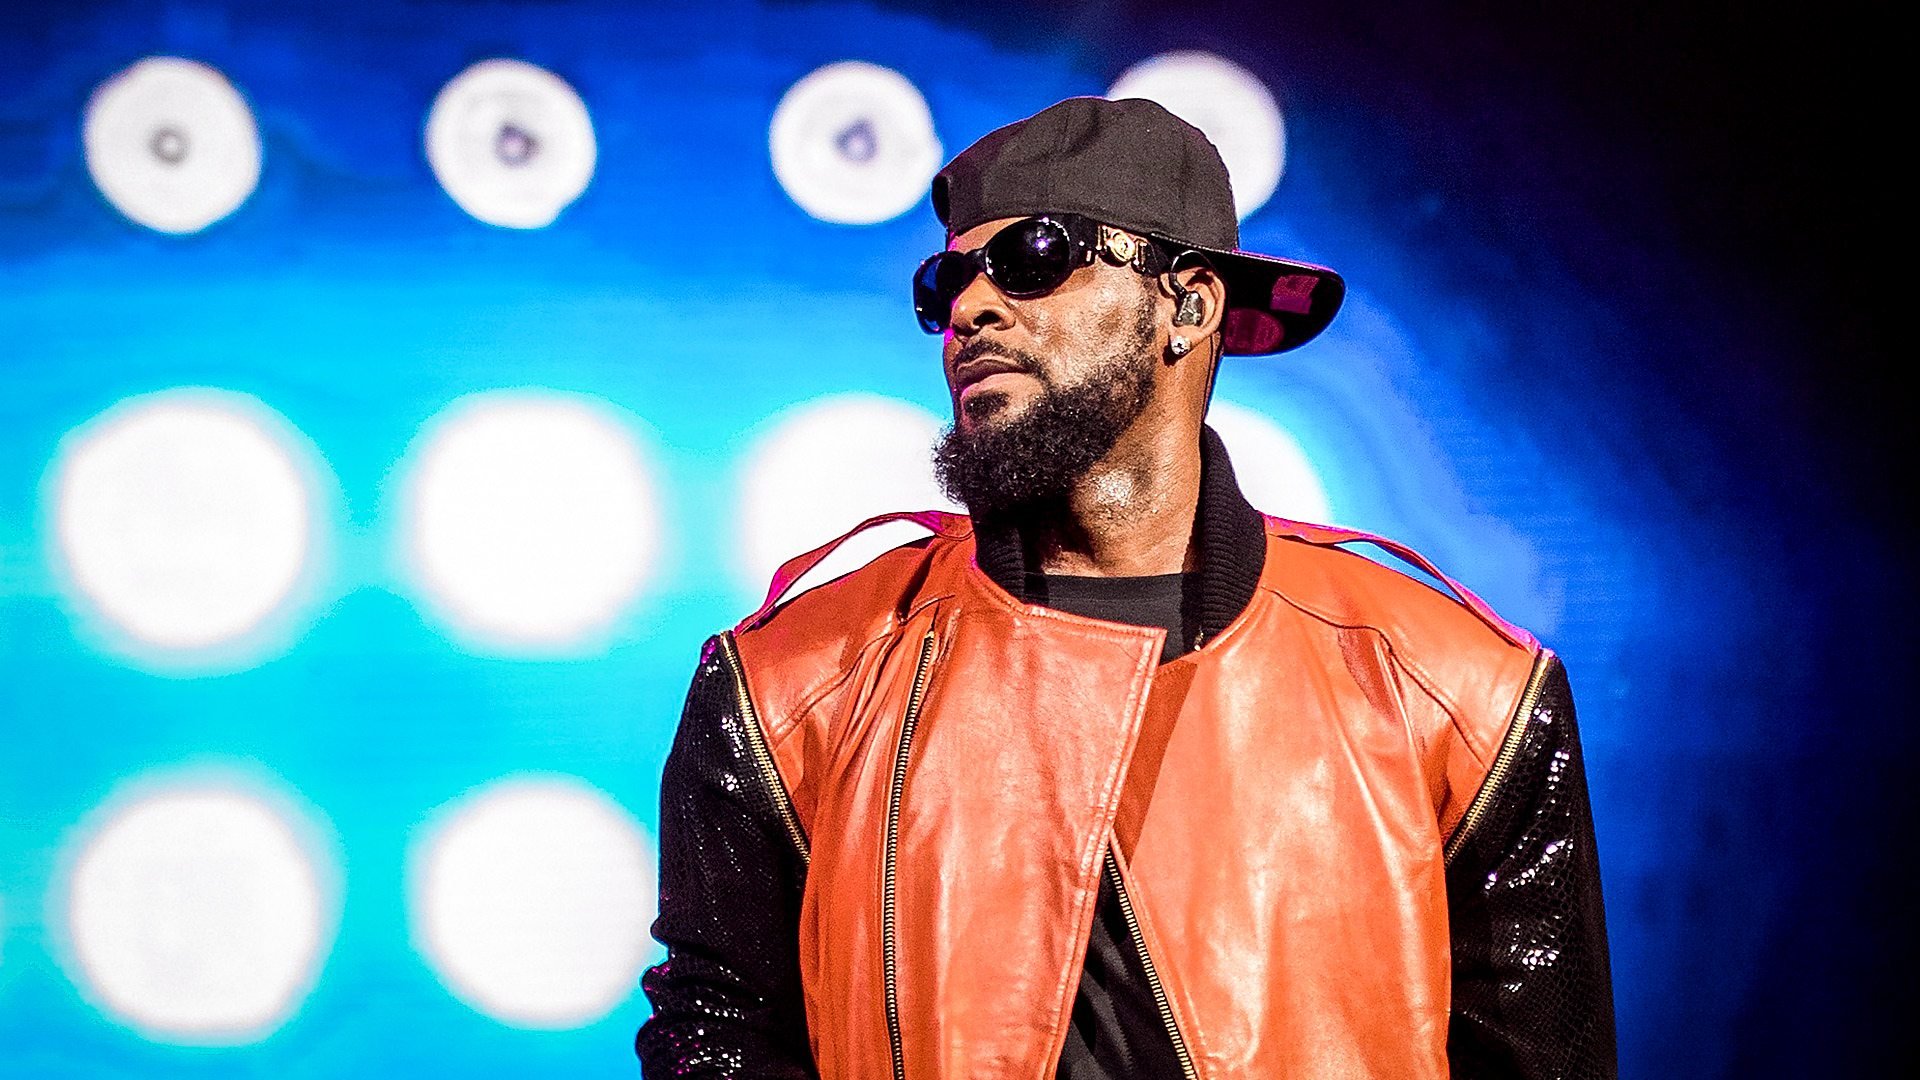 R Kelly The Sex Scandal Continues